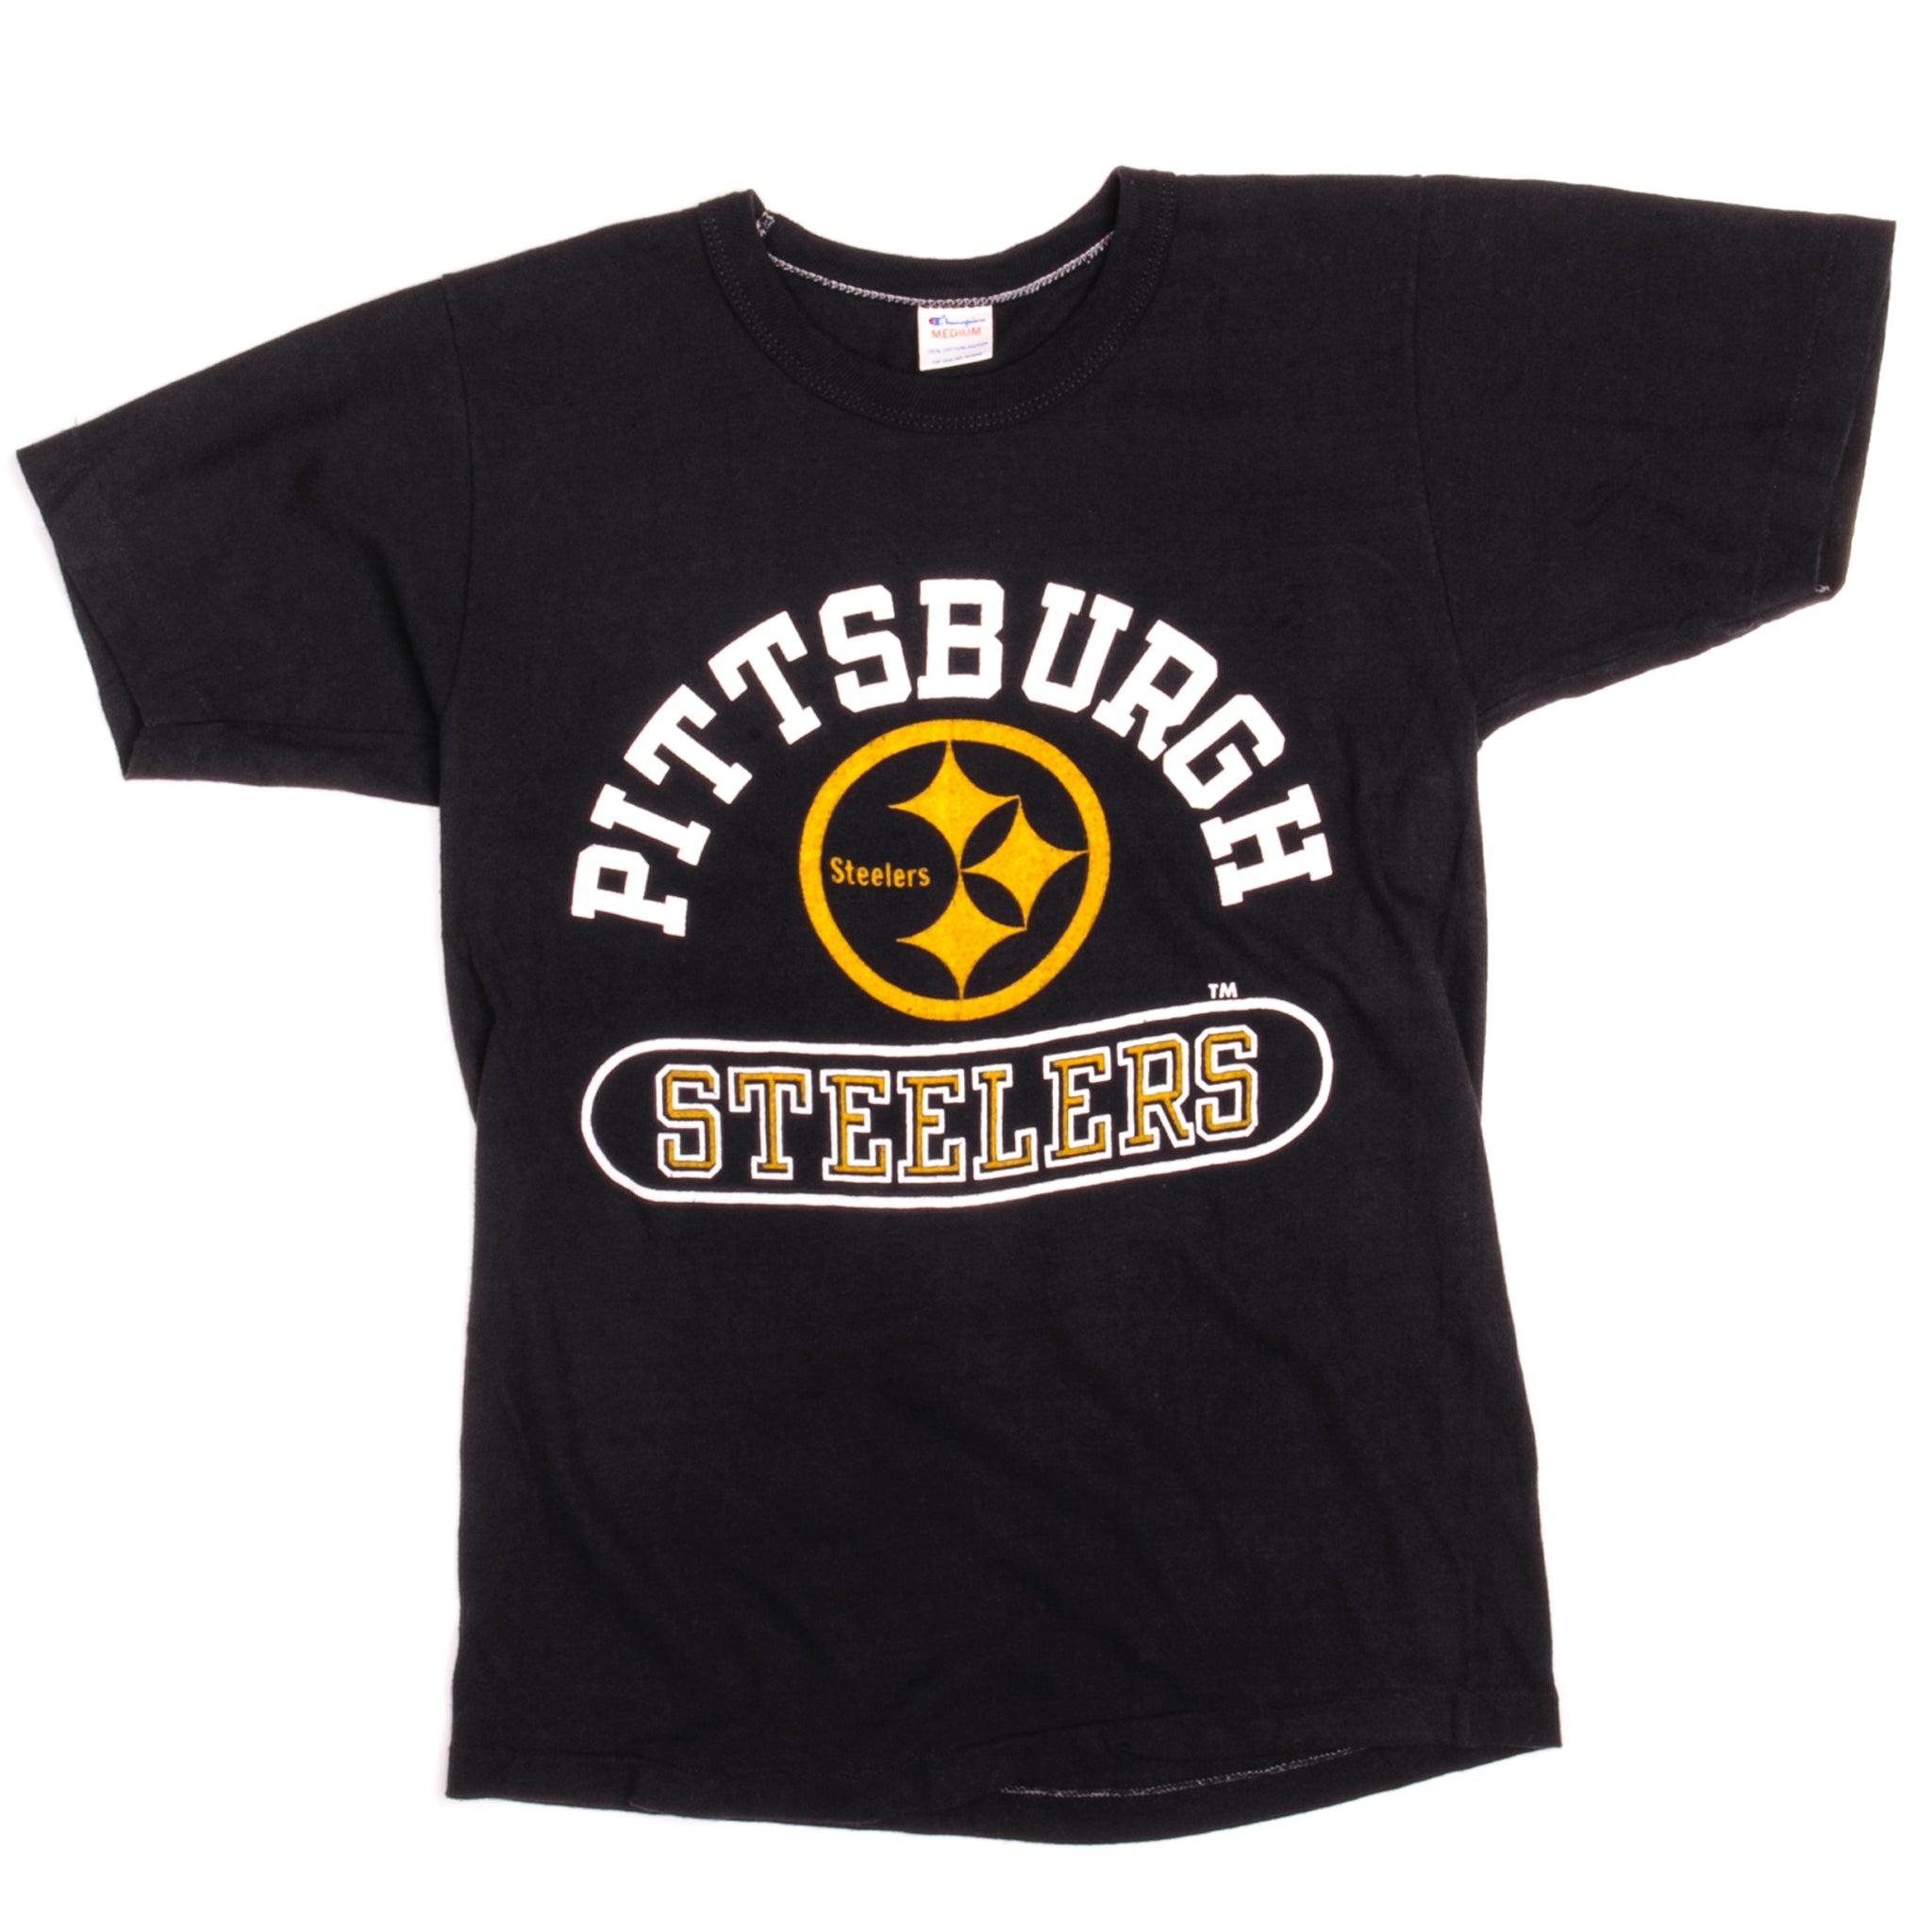 Vintage Champion NFL Pittsburgh Steelers Tee Shirt 1969-EARLY 1980s Size Xs Made in USA